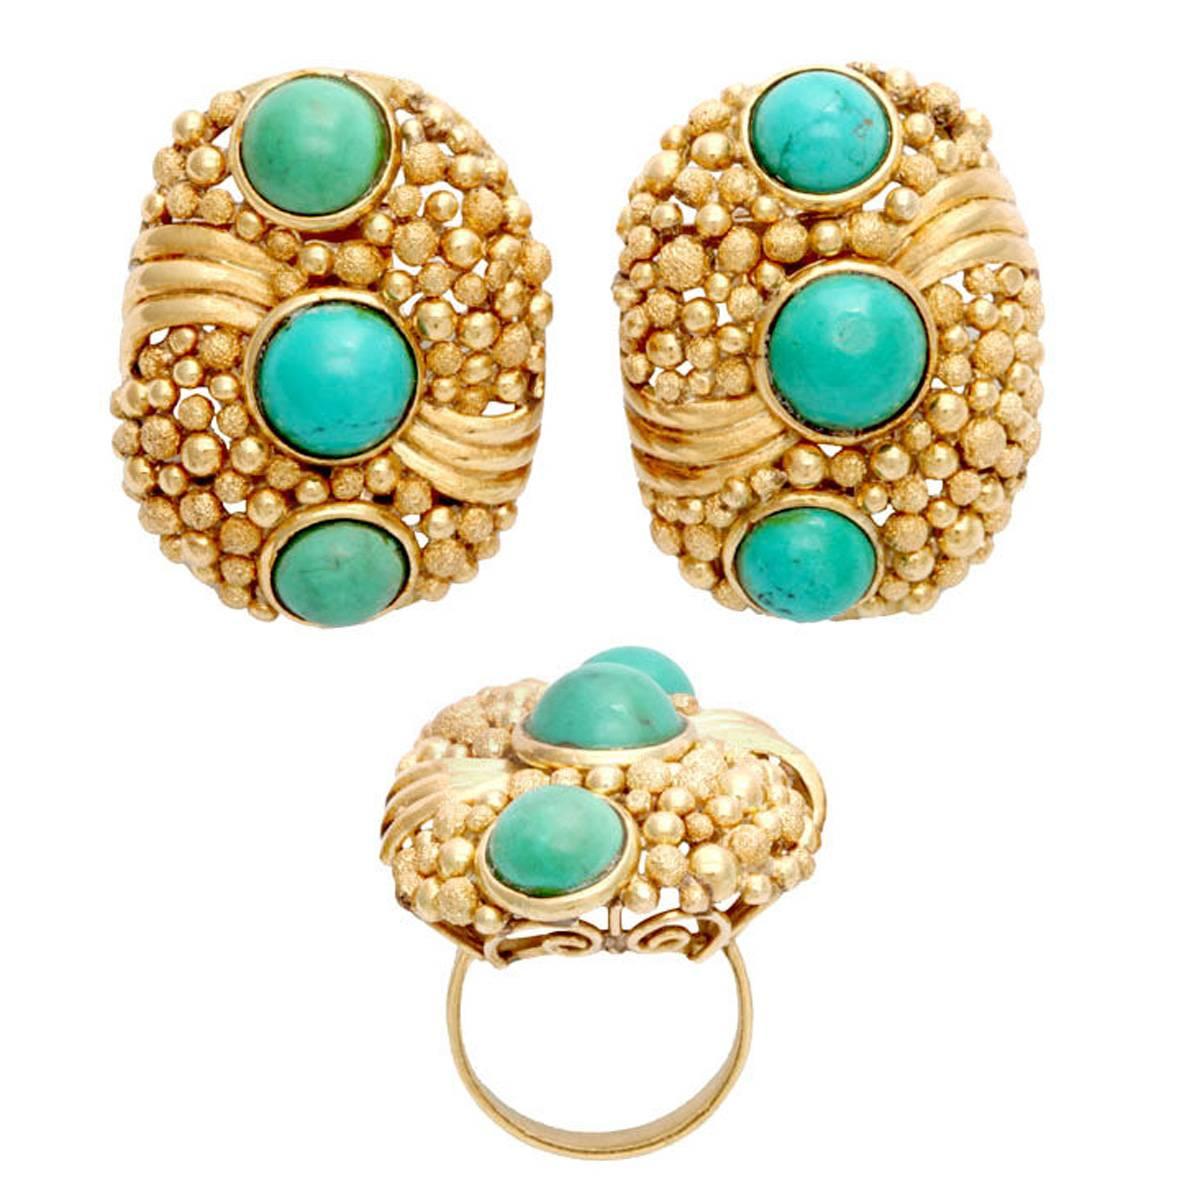 1970s Modern Design Textured Bubbles Turquoise Yellow Gold Ring and Earrings